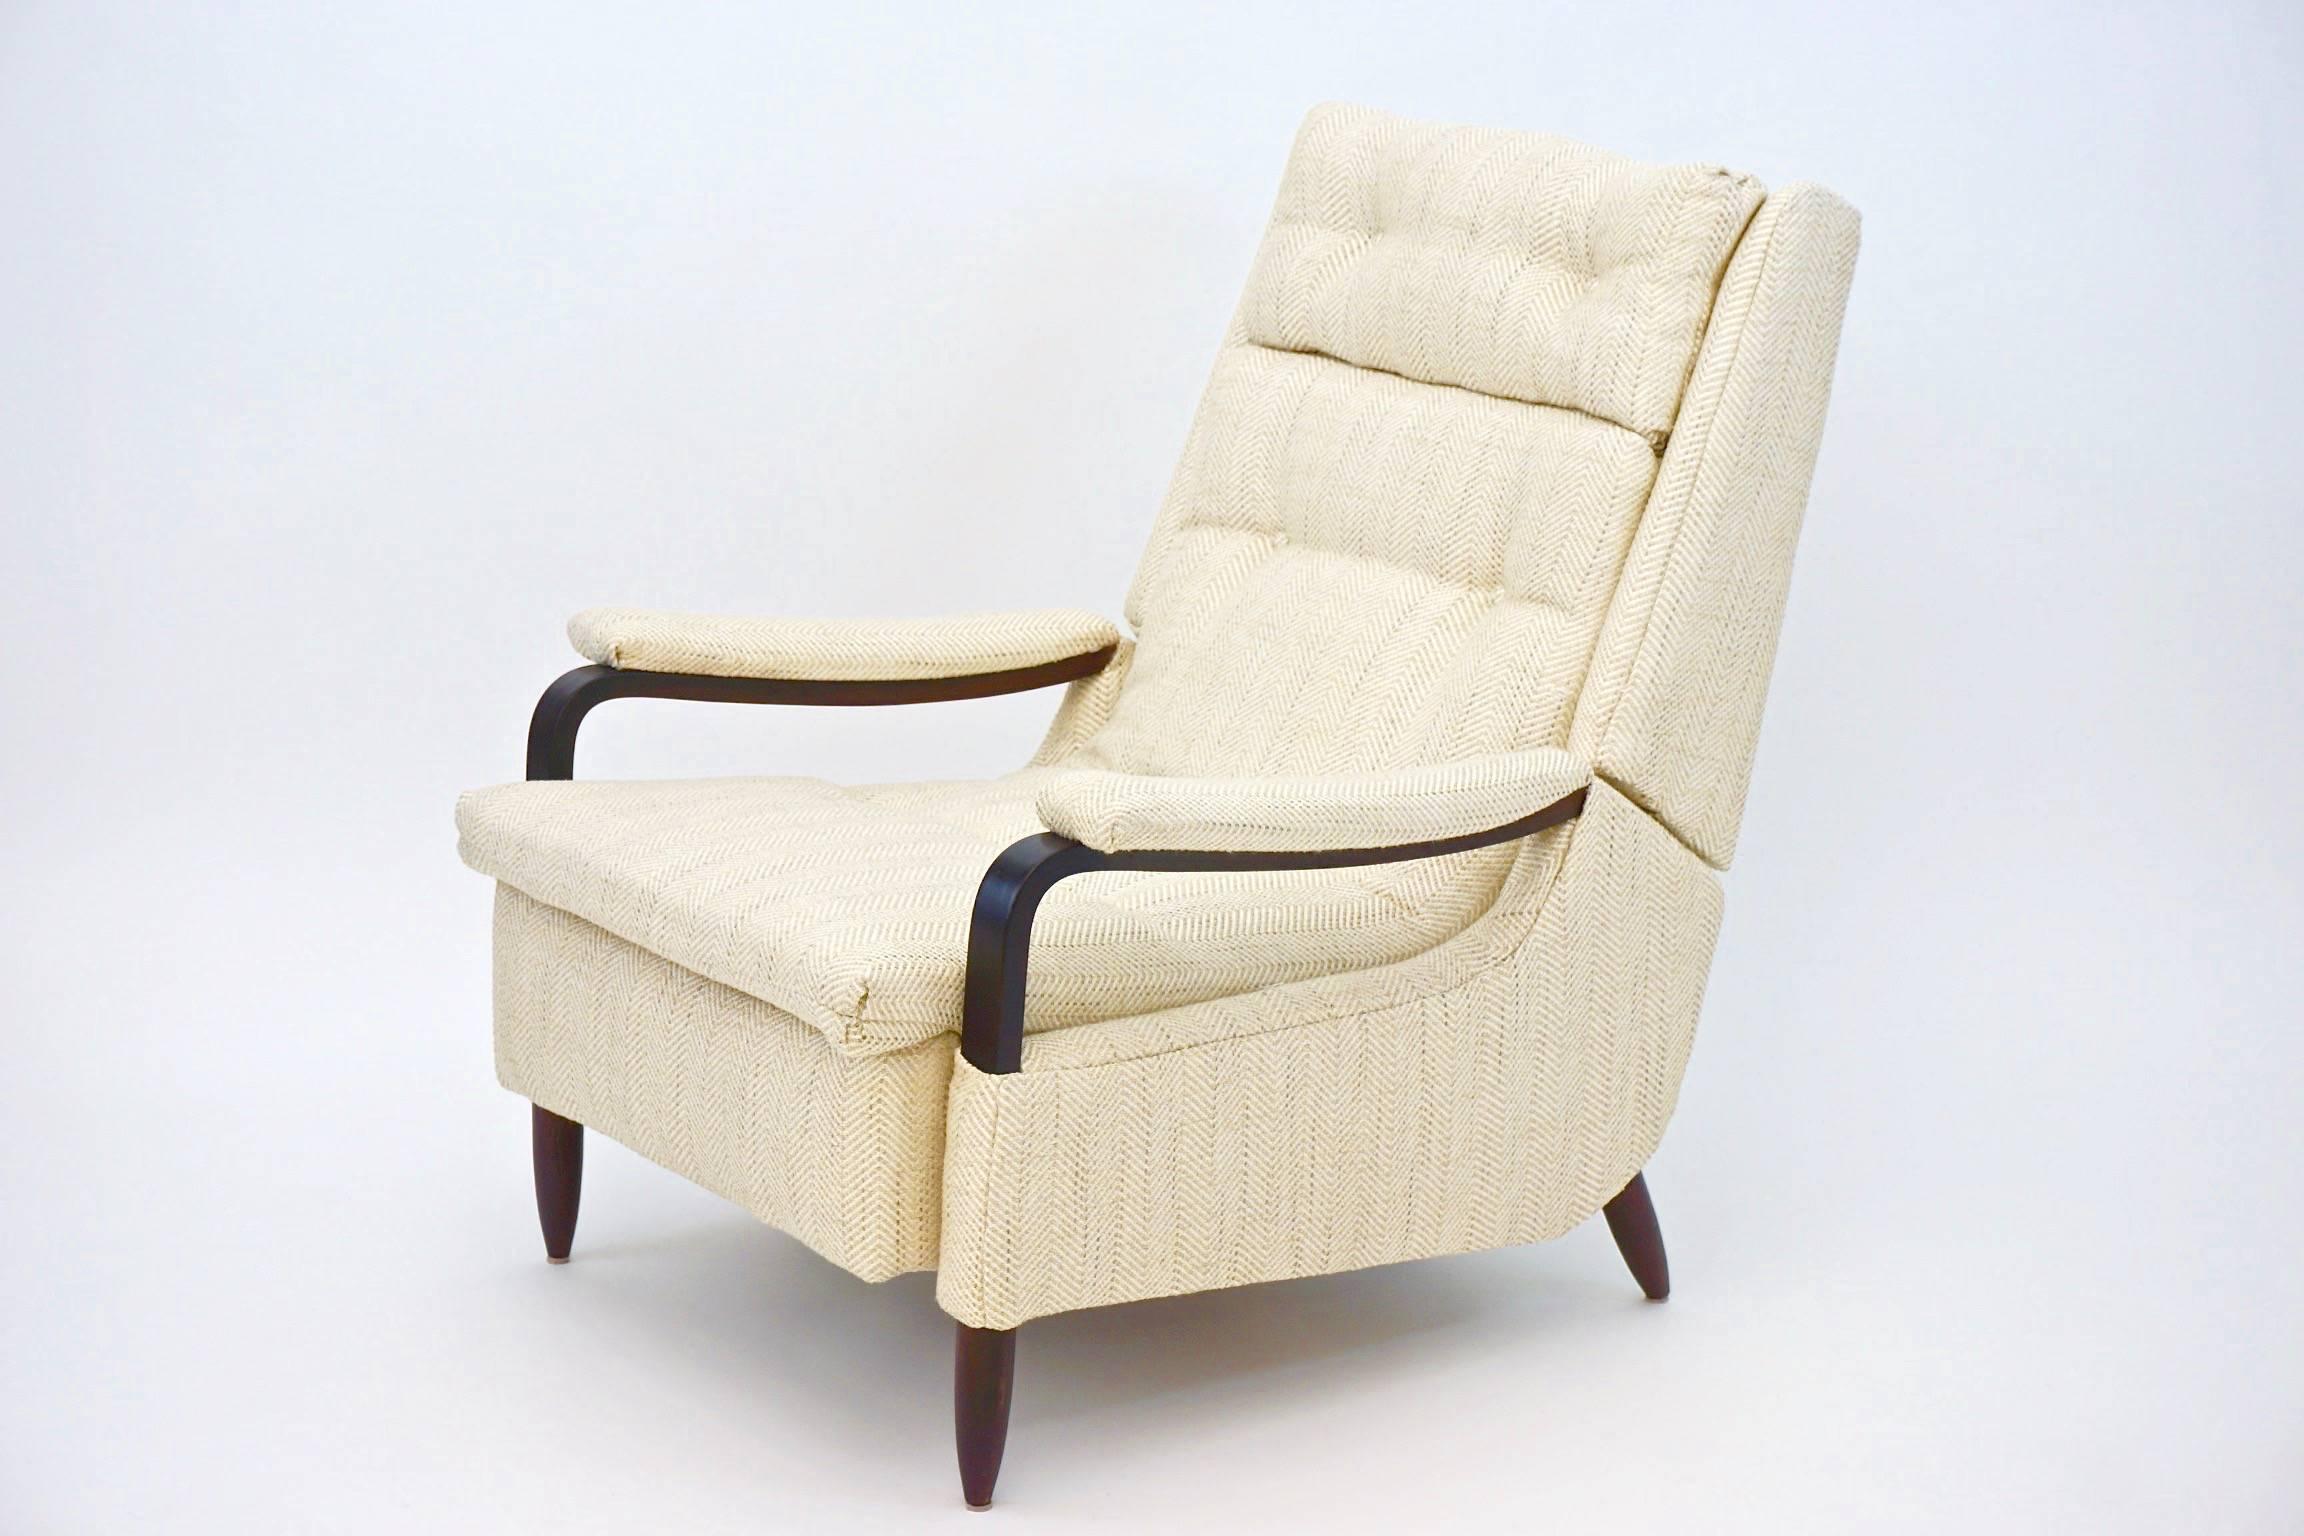 Vintage 1960s Recliner newly upholstered in creme herringbone tweed.  Completely Restored.  Wooden arms and legs.  The chair features a fold out leg rest that comes out when the chair is reclined.

